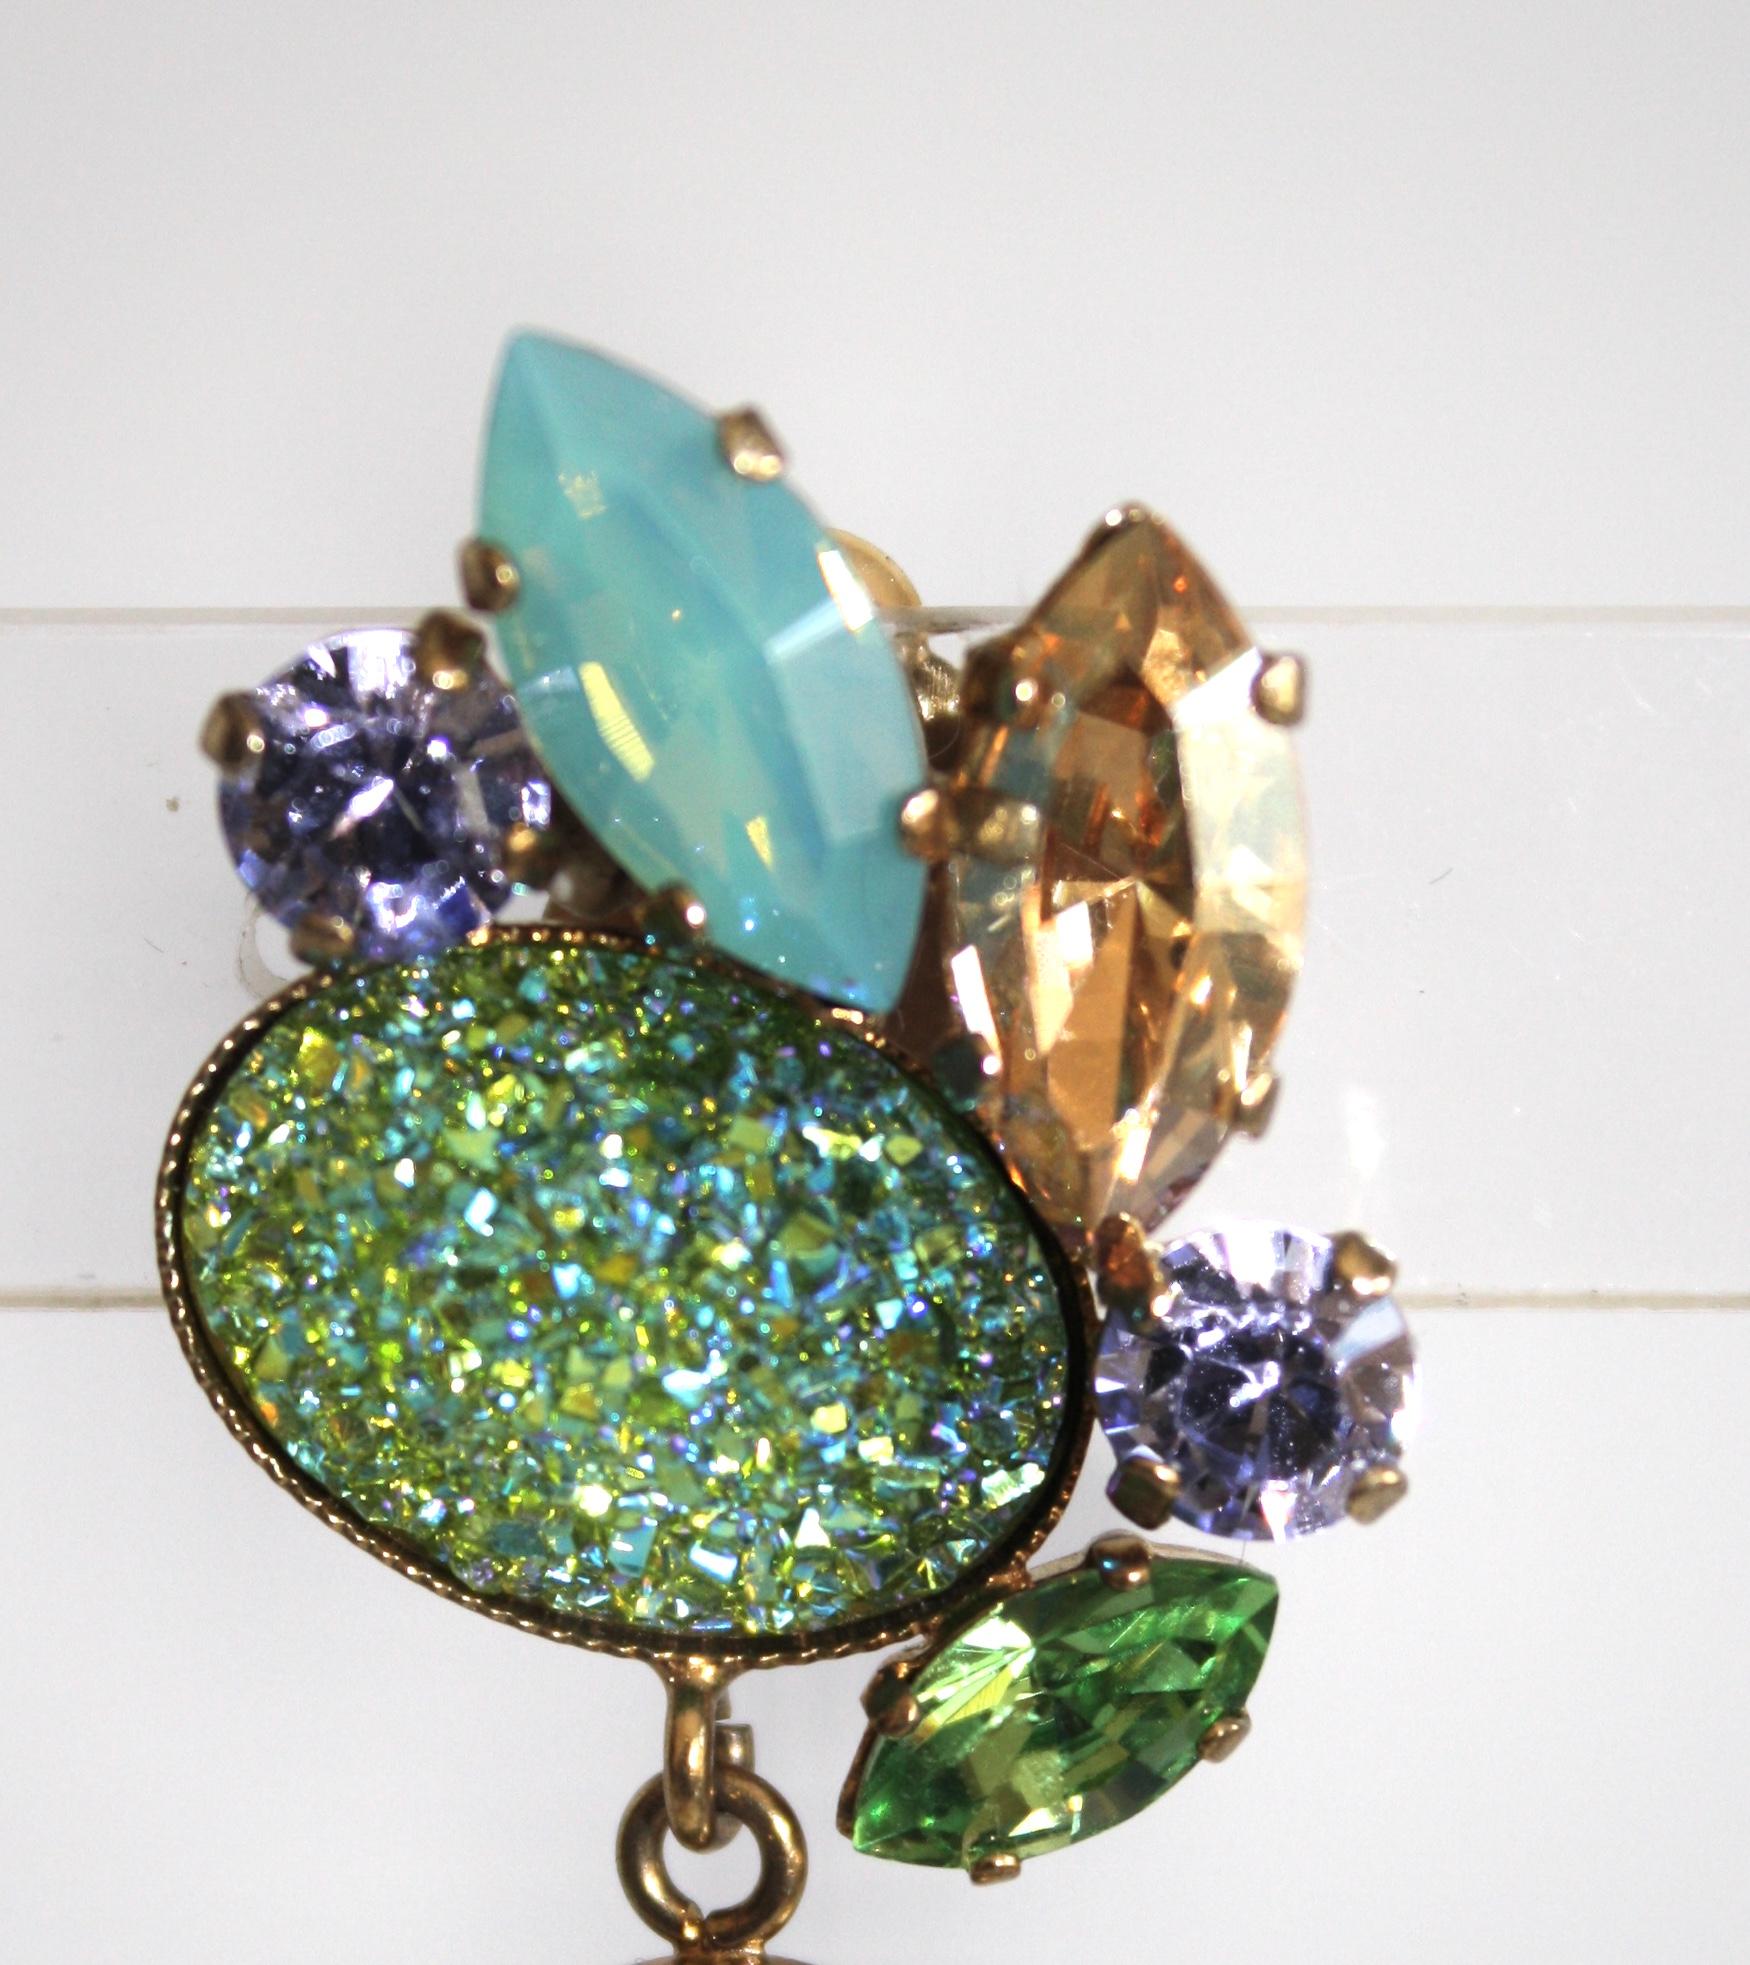 Agate and Swarovski Crystal limited series clip earrings from Philippe Ferrandis. 